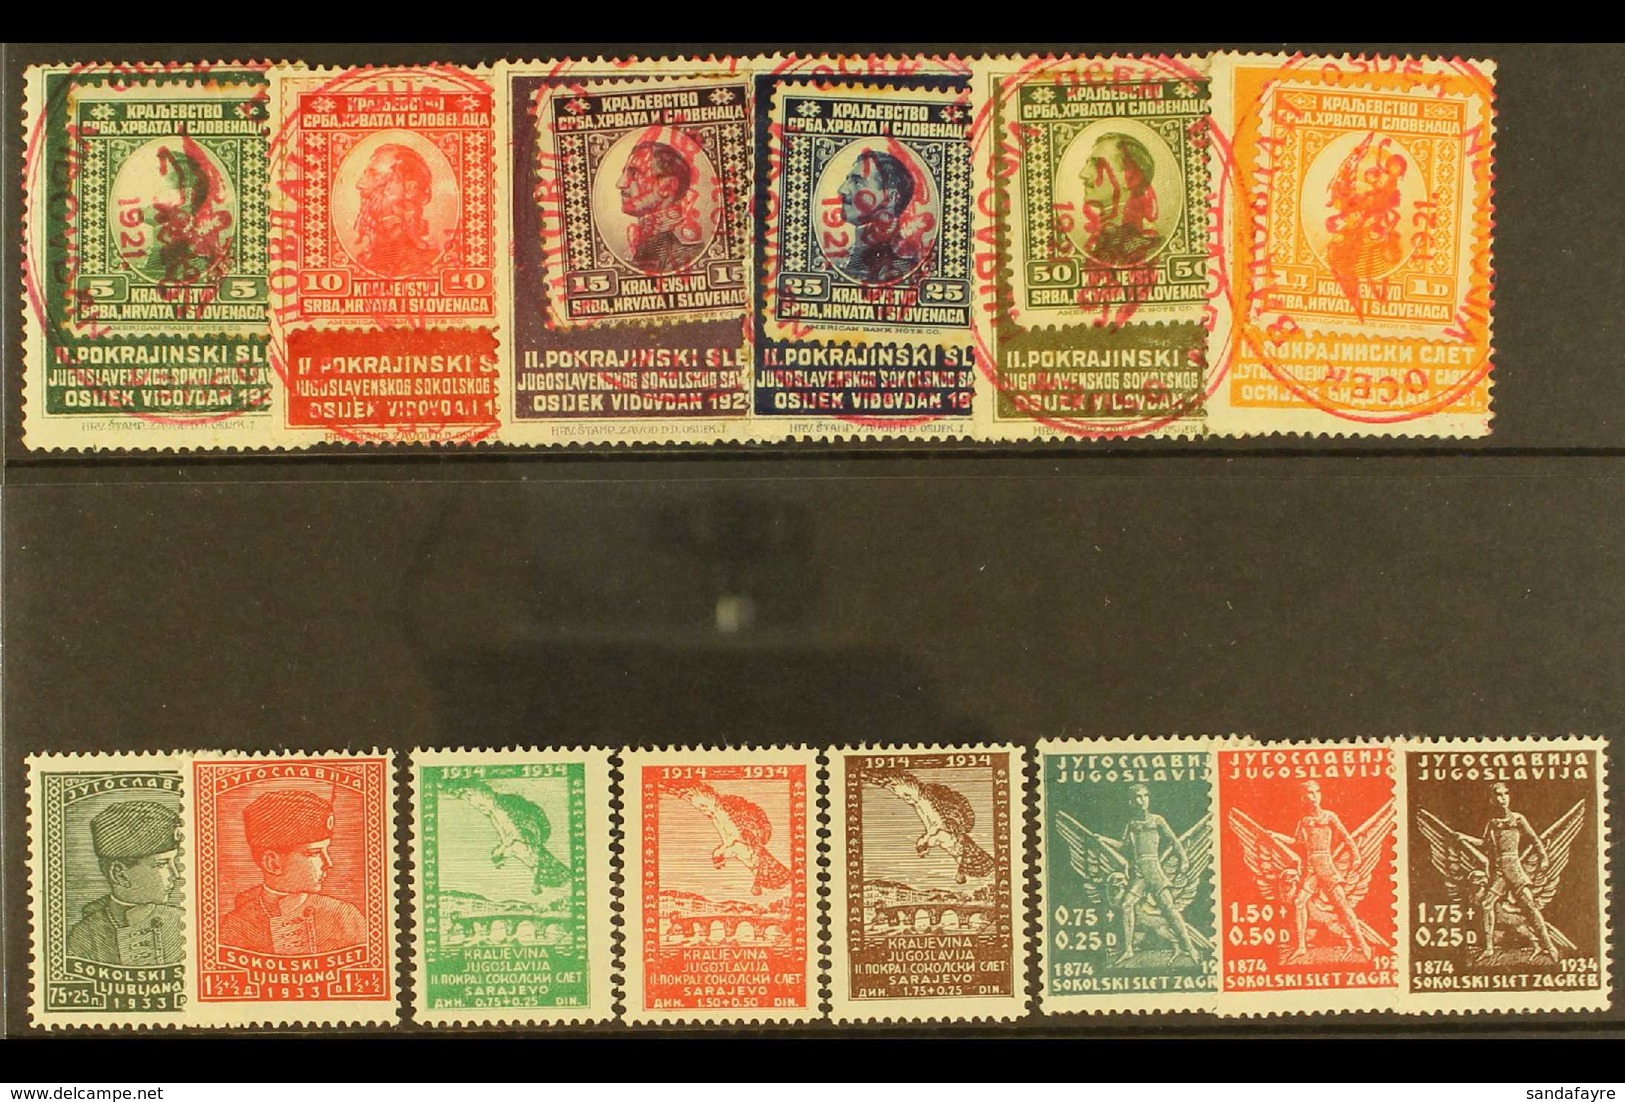 GYMNASTICS - THE SOKOL MOVEMENT 1921-34 Group Includes 1921 Set Of 6 Stamps Affixed To Special Sokol Games "collar" Labe - Unclassified